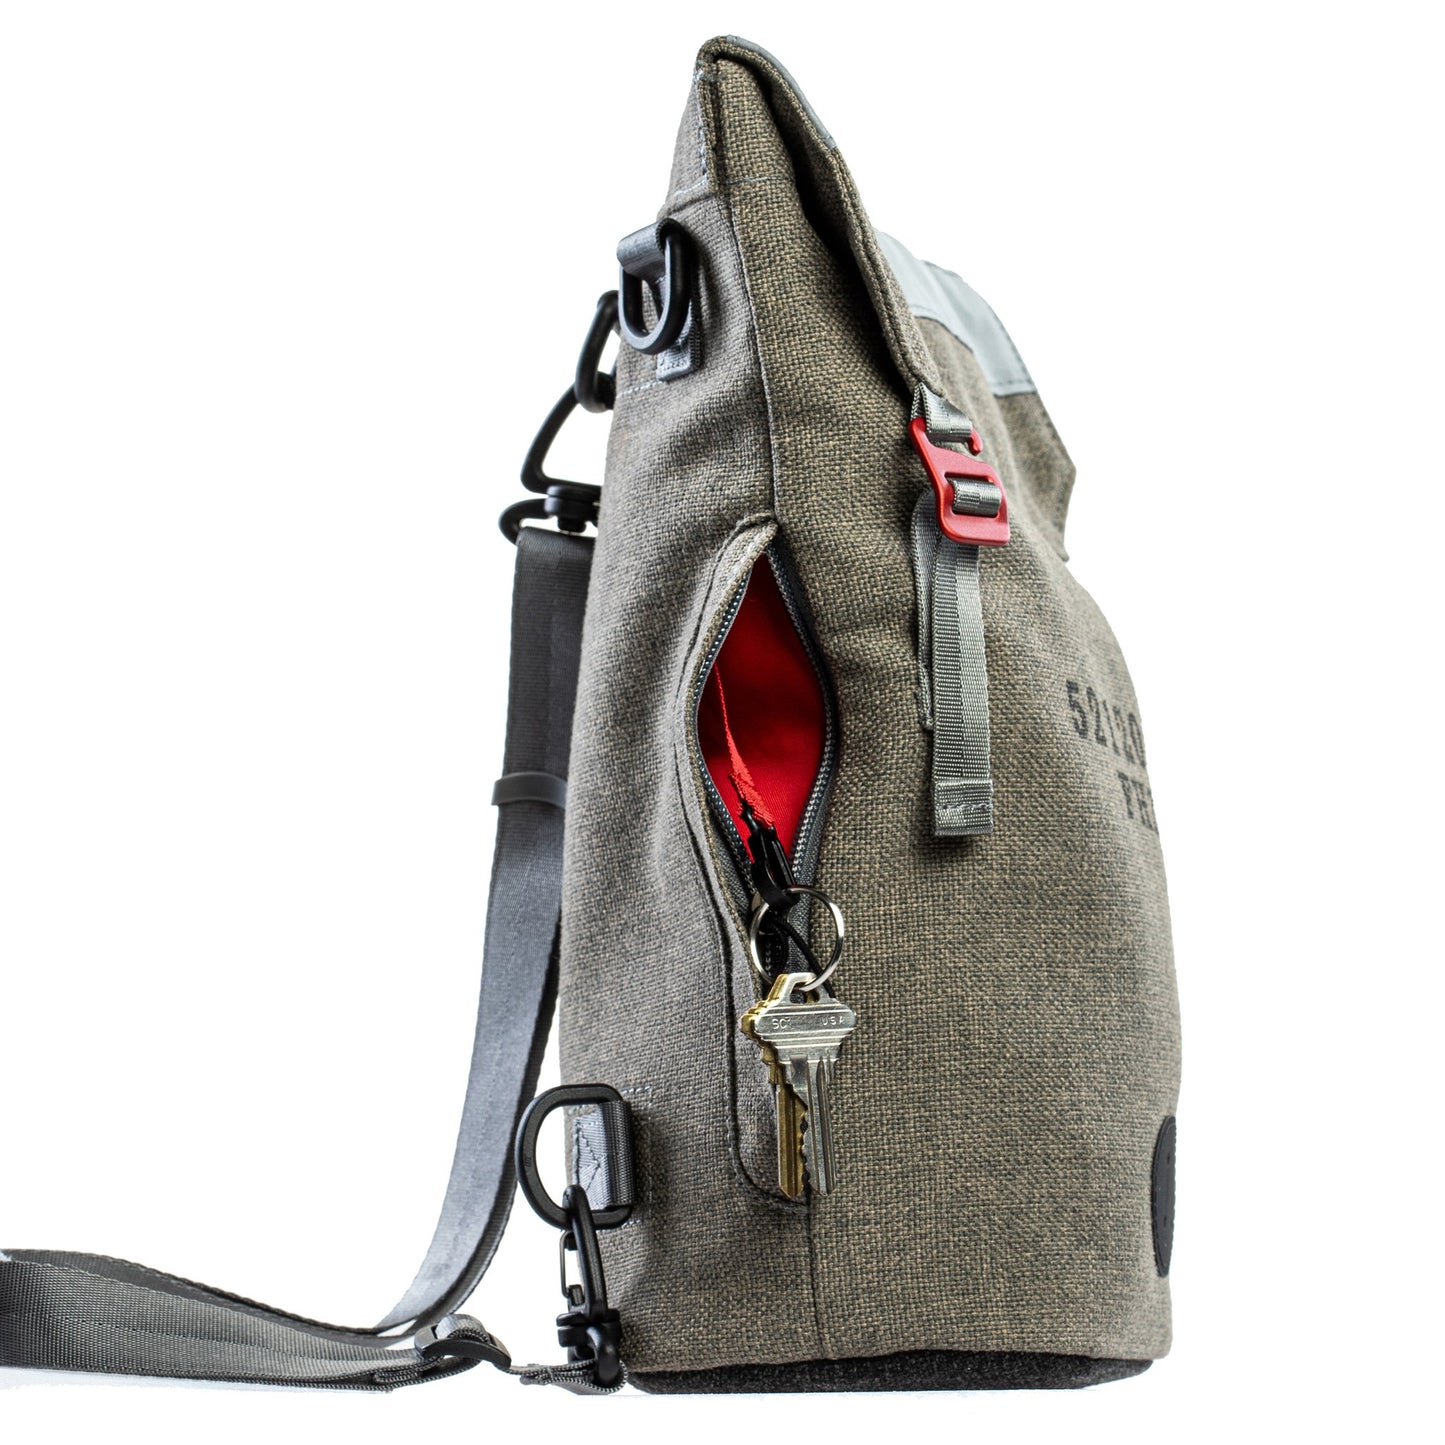 Side view of a Fierce Hazel convertible backpack made with sustainable fabric. Red interior and key clip. Functional, rugged and water-resistant it is military styled but beautiful